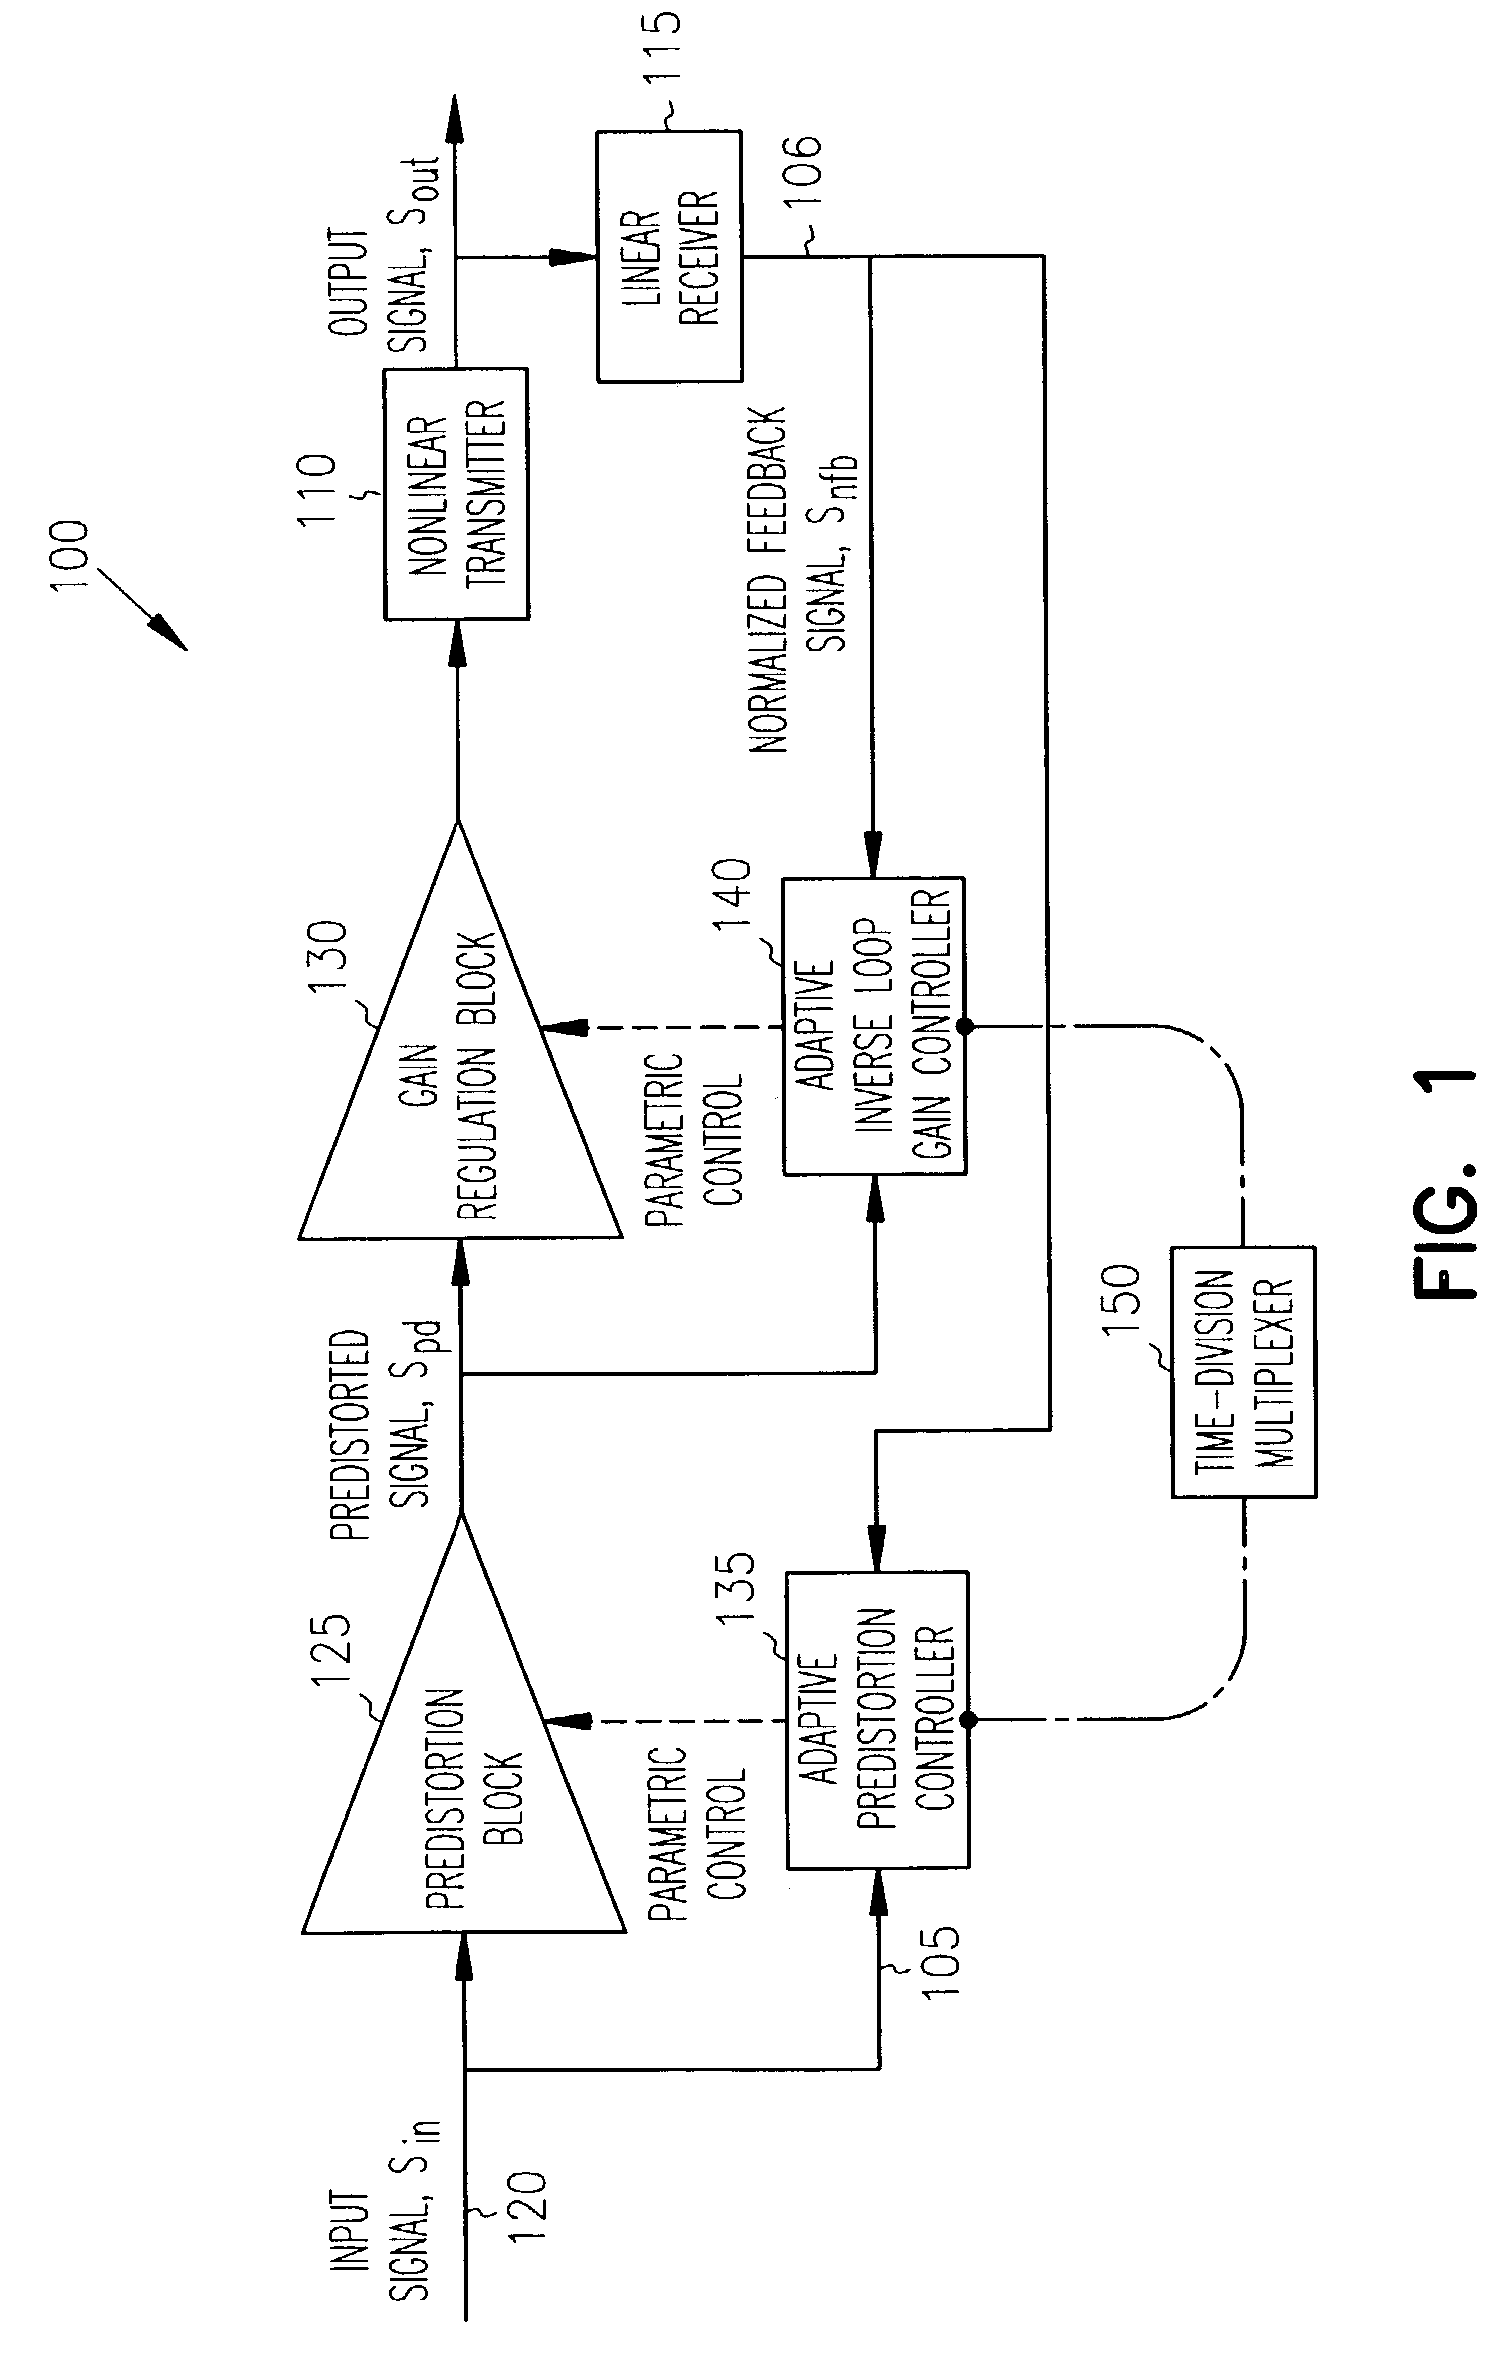 Adaptive controller for linearization of transmitter with impairments